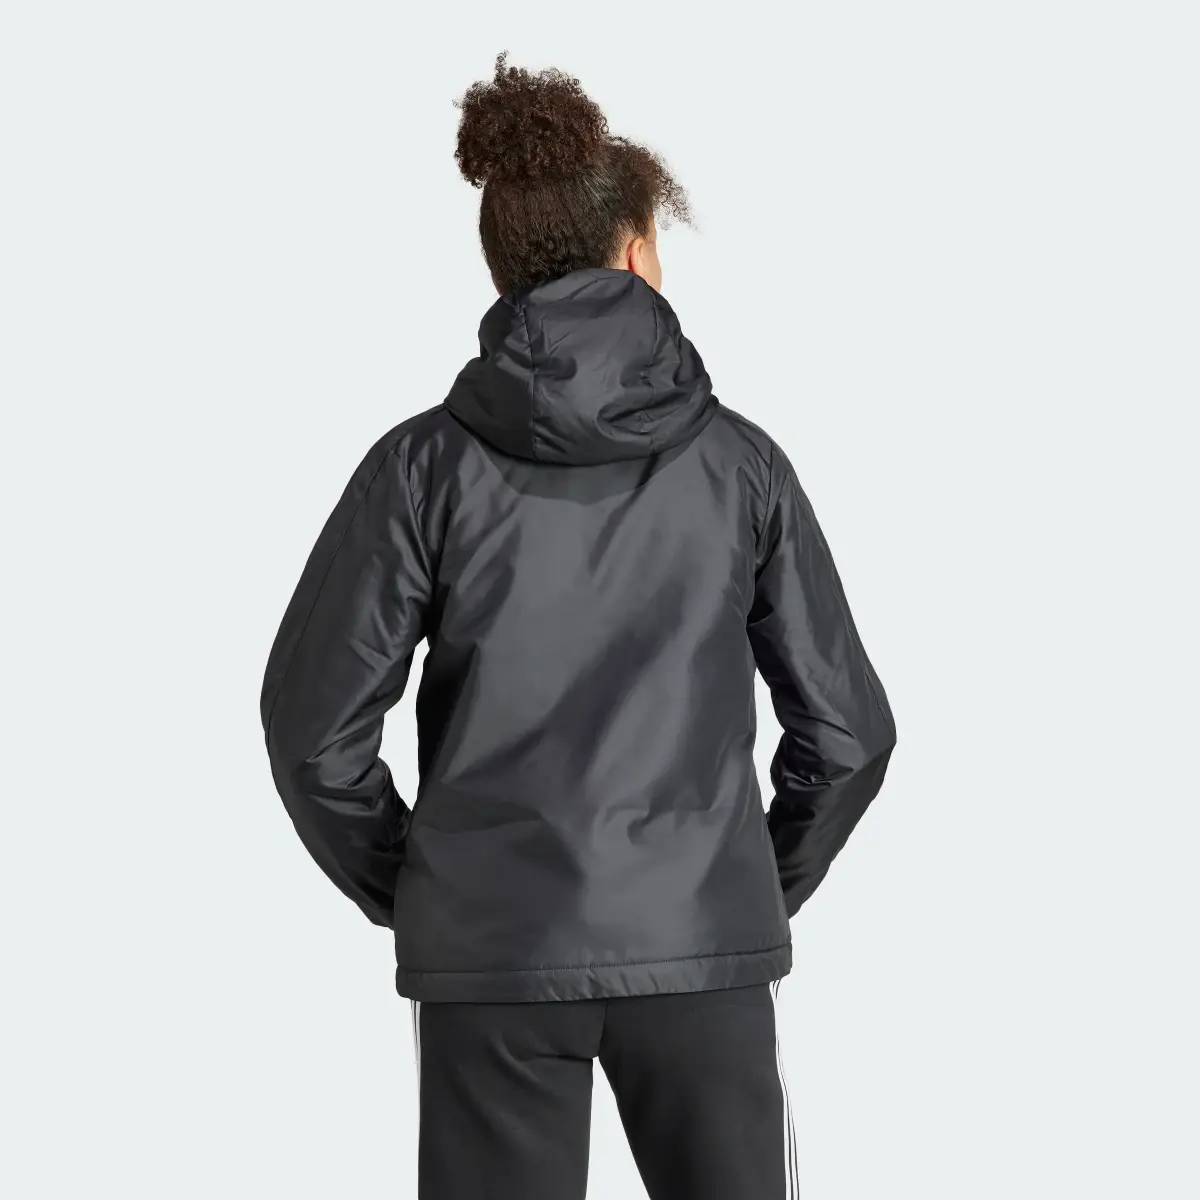 Adidas Essentials 3-Stripes Insulated Hooded Jacket. 3